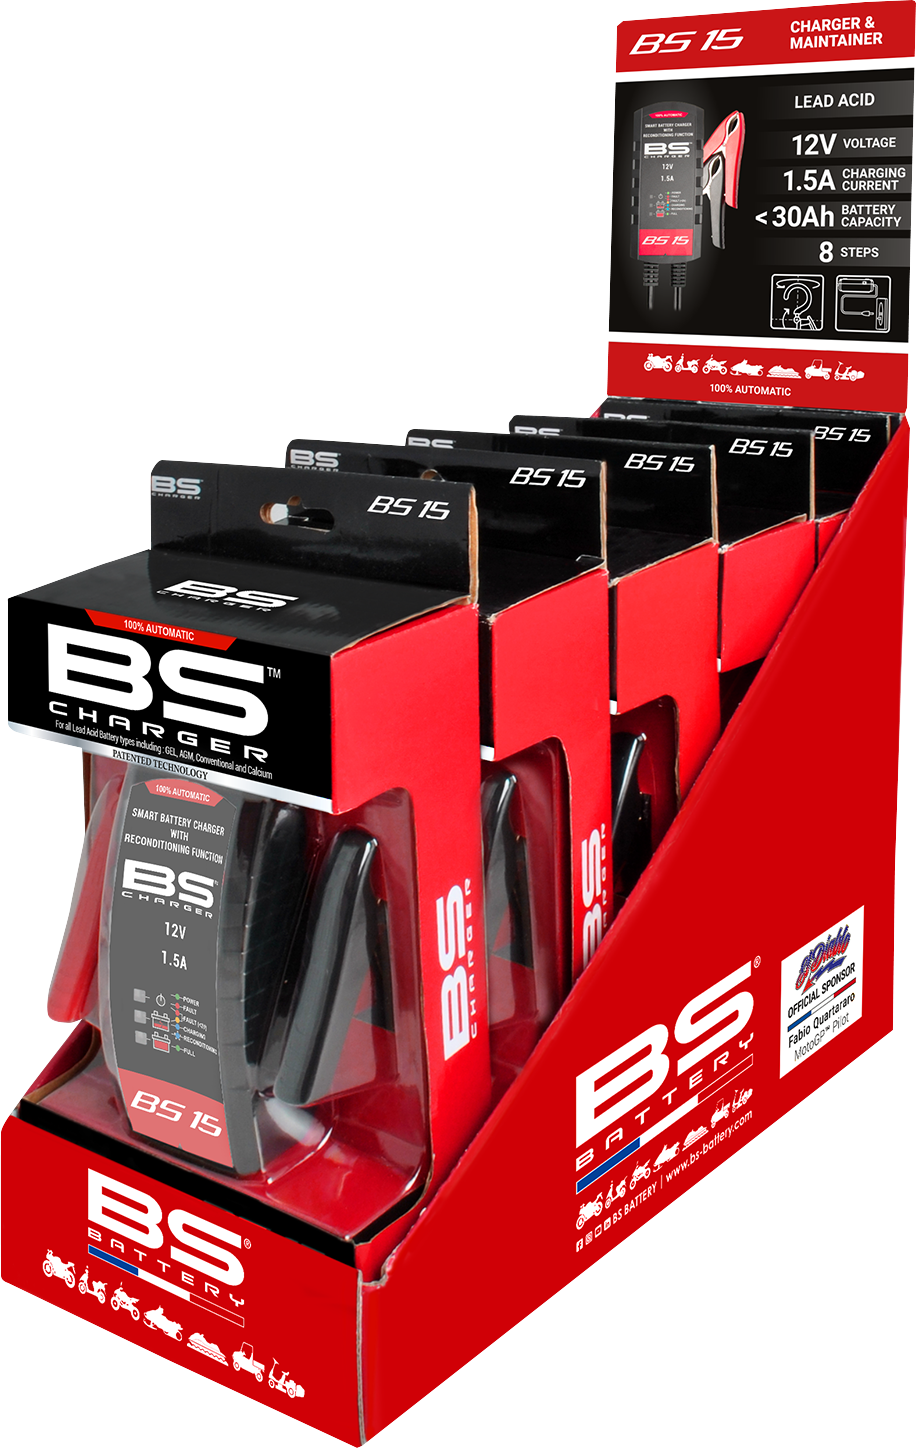 BS BATTERY Chargers Display 700525